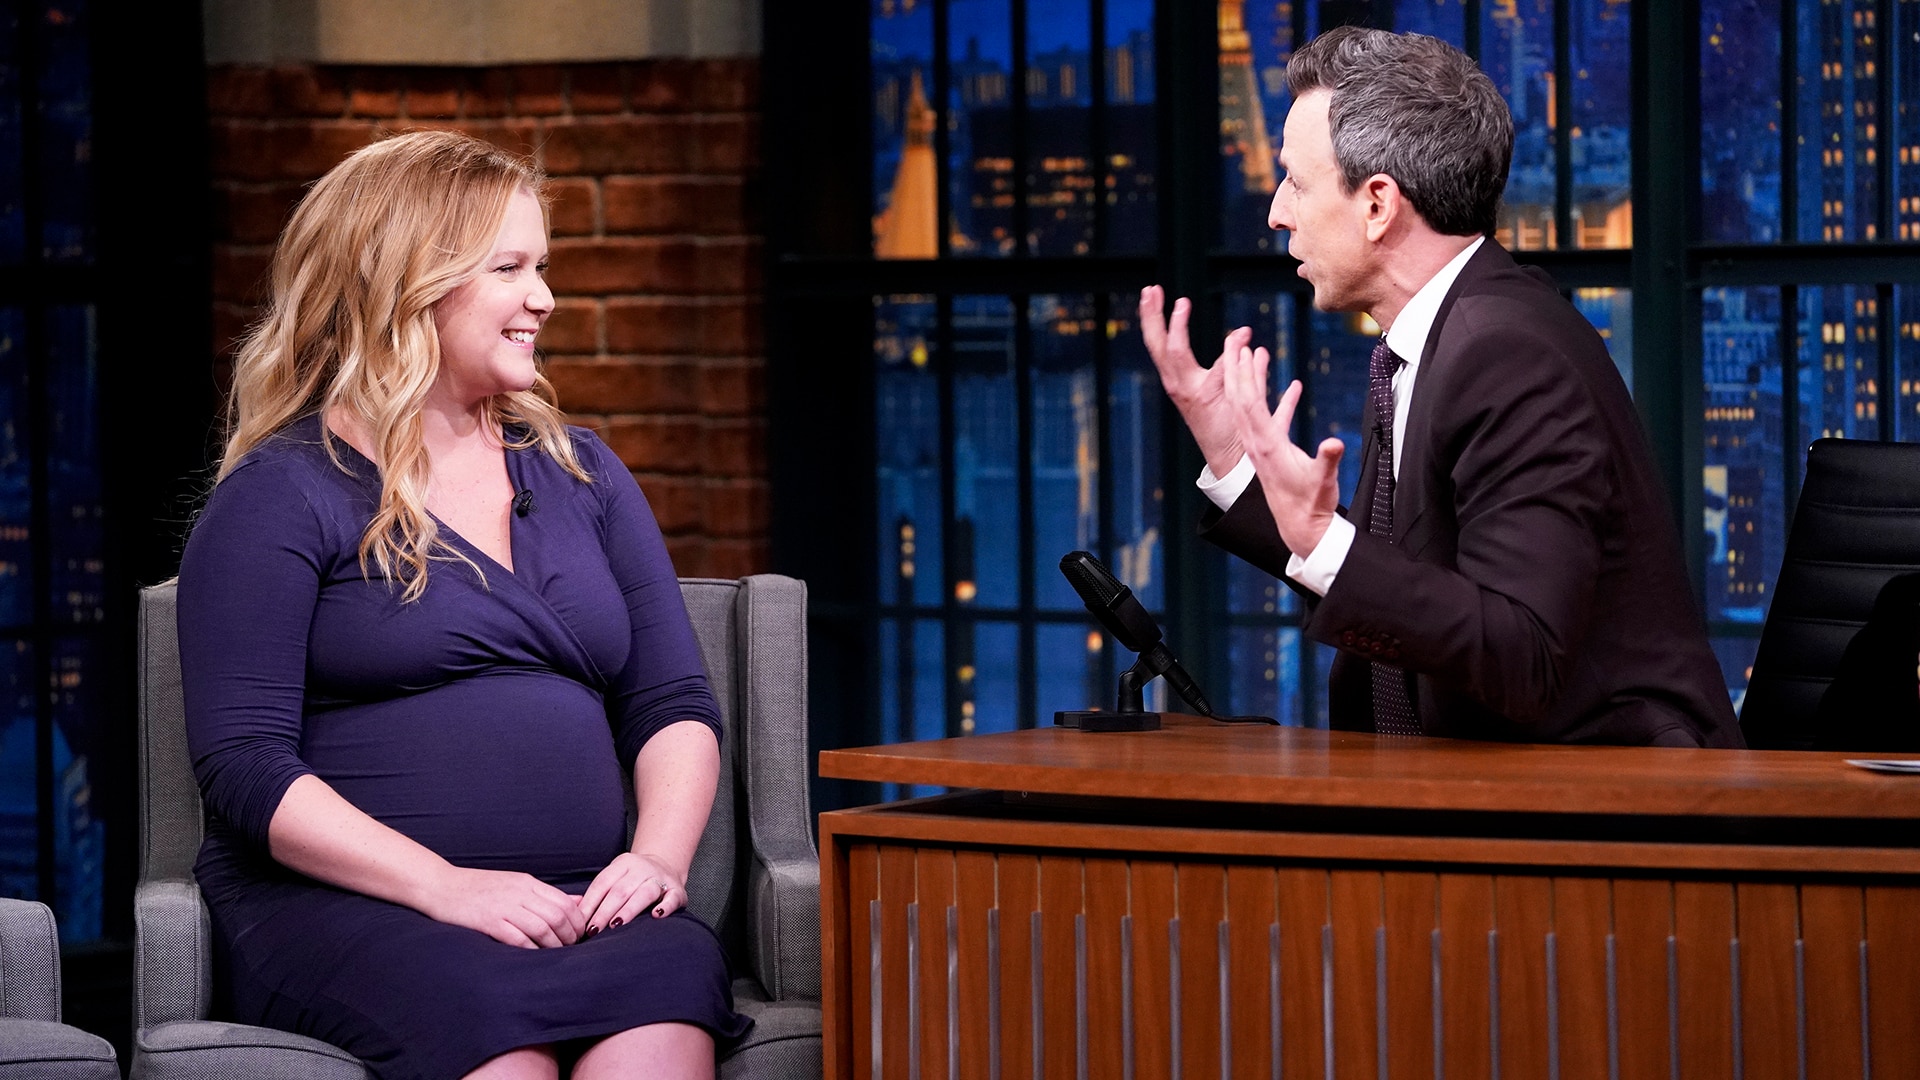 Watch Late Night with Seth Meyers Episode: Amy Schumer, Natalie Morales, PUP - NBC.com1920 x 1080